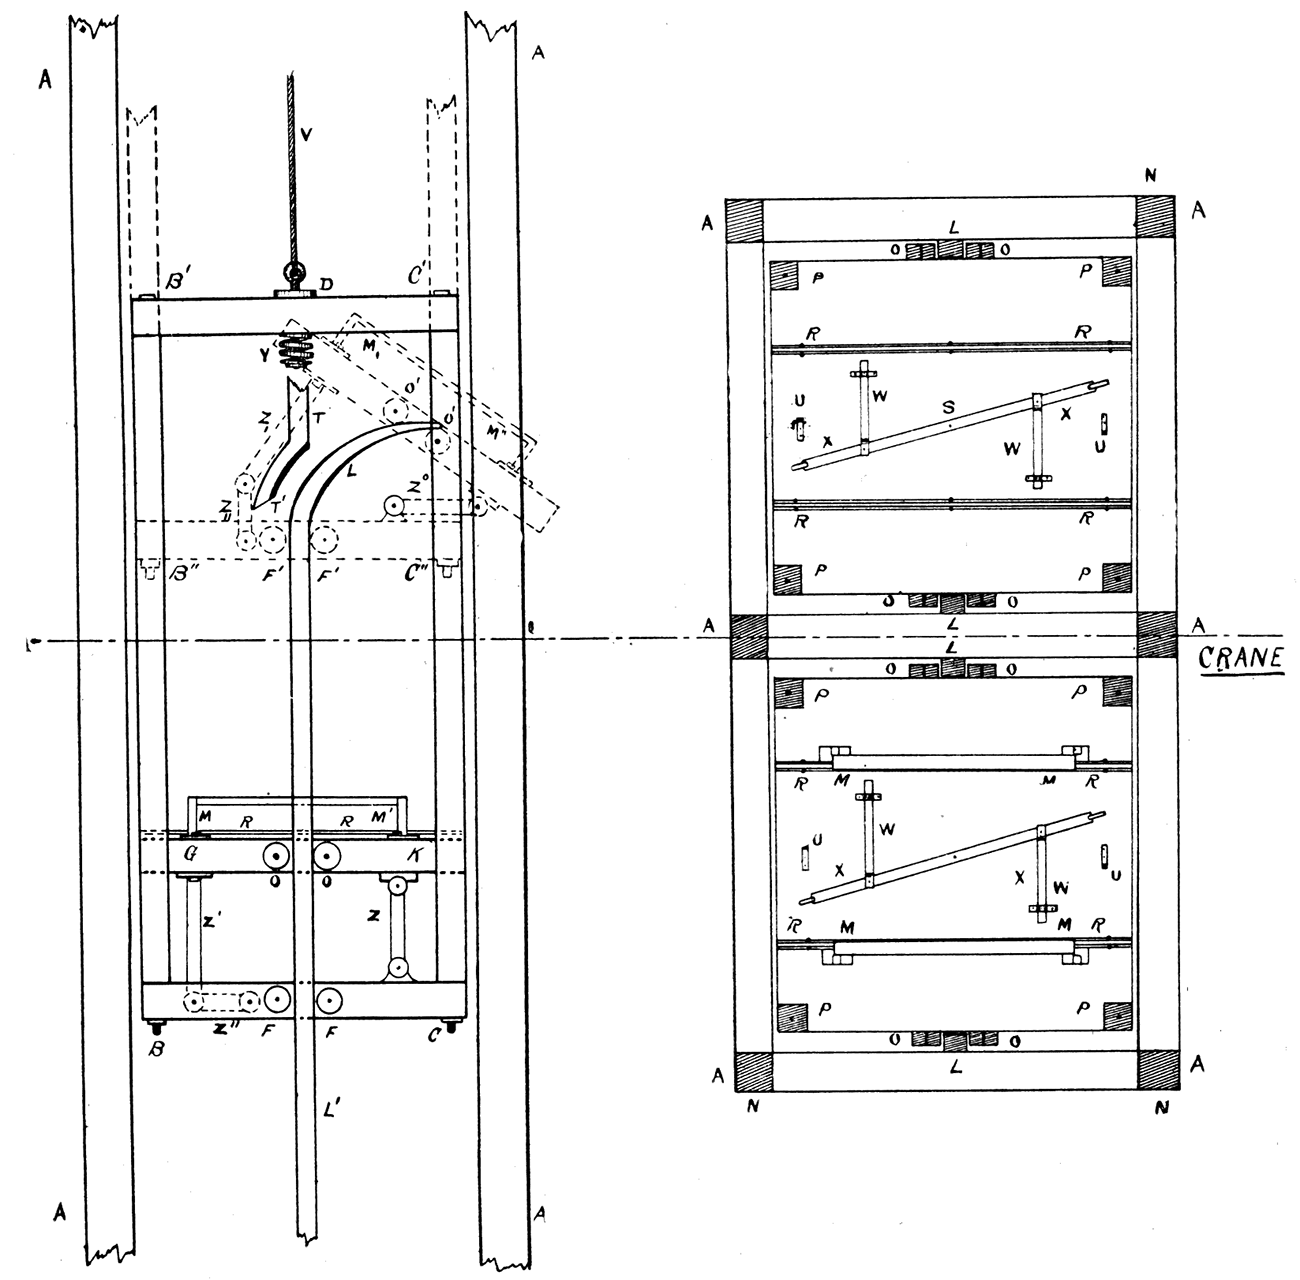 Section of Elevator Shaft, showing the Hamilton Automatic Dump.